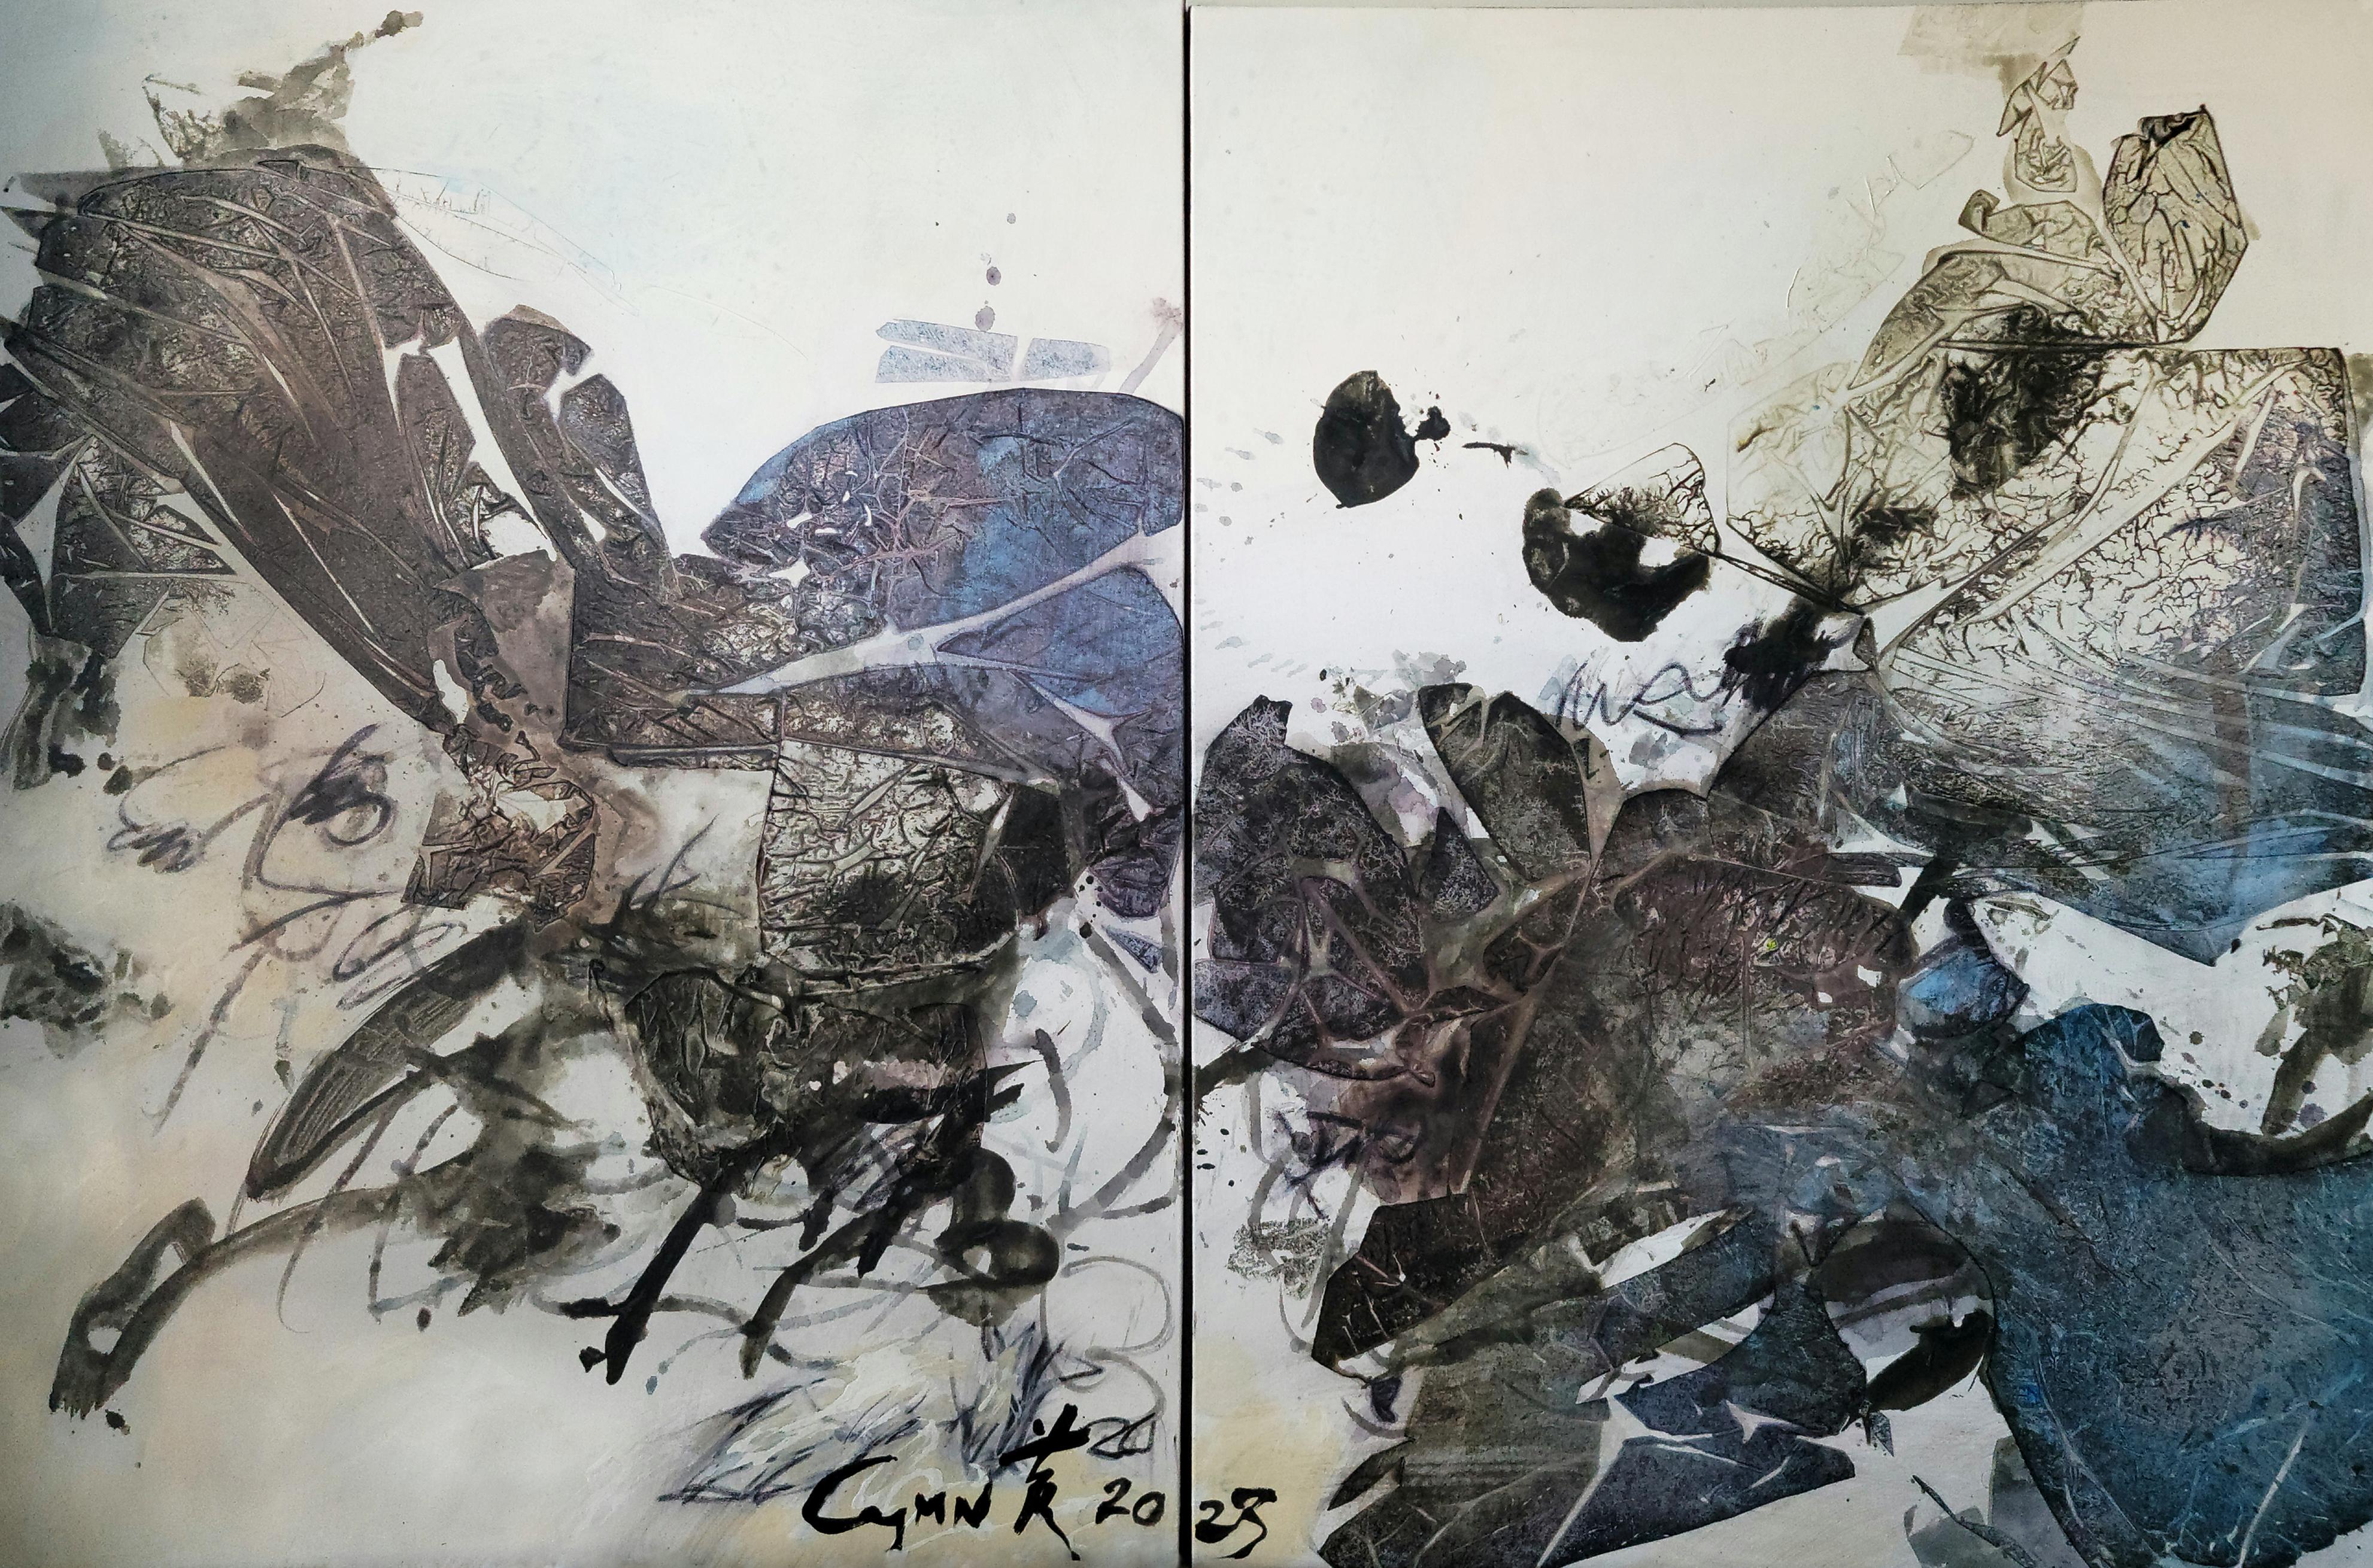 Harmonious Duality- Vivid, Lyrical, Expressive Abstract, Zen Calligraphy - Painting by Cymn Wong 